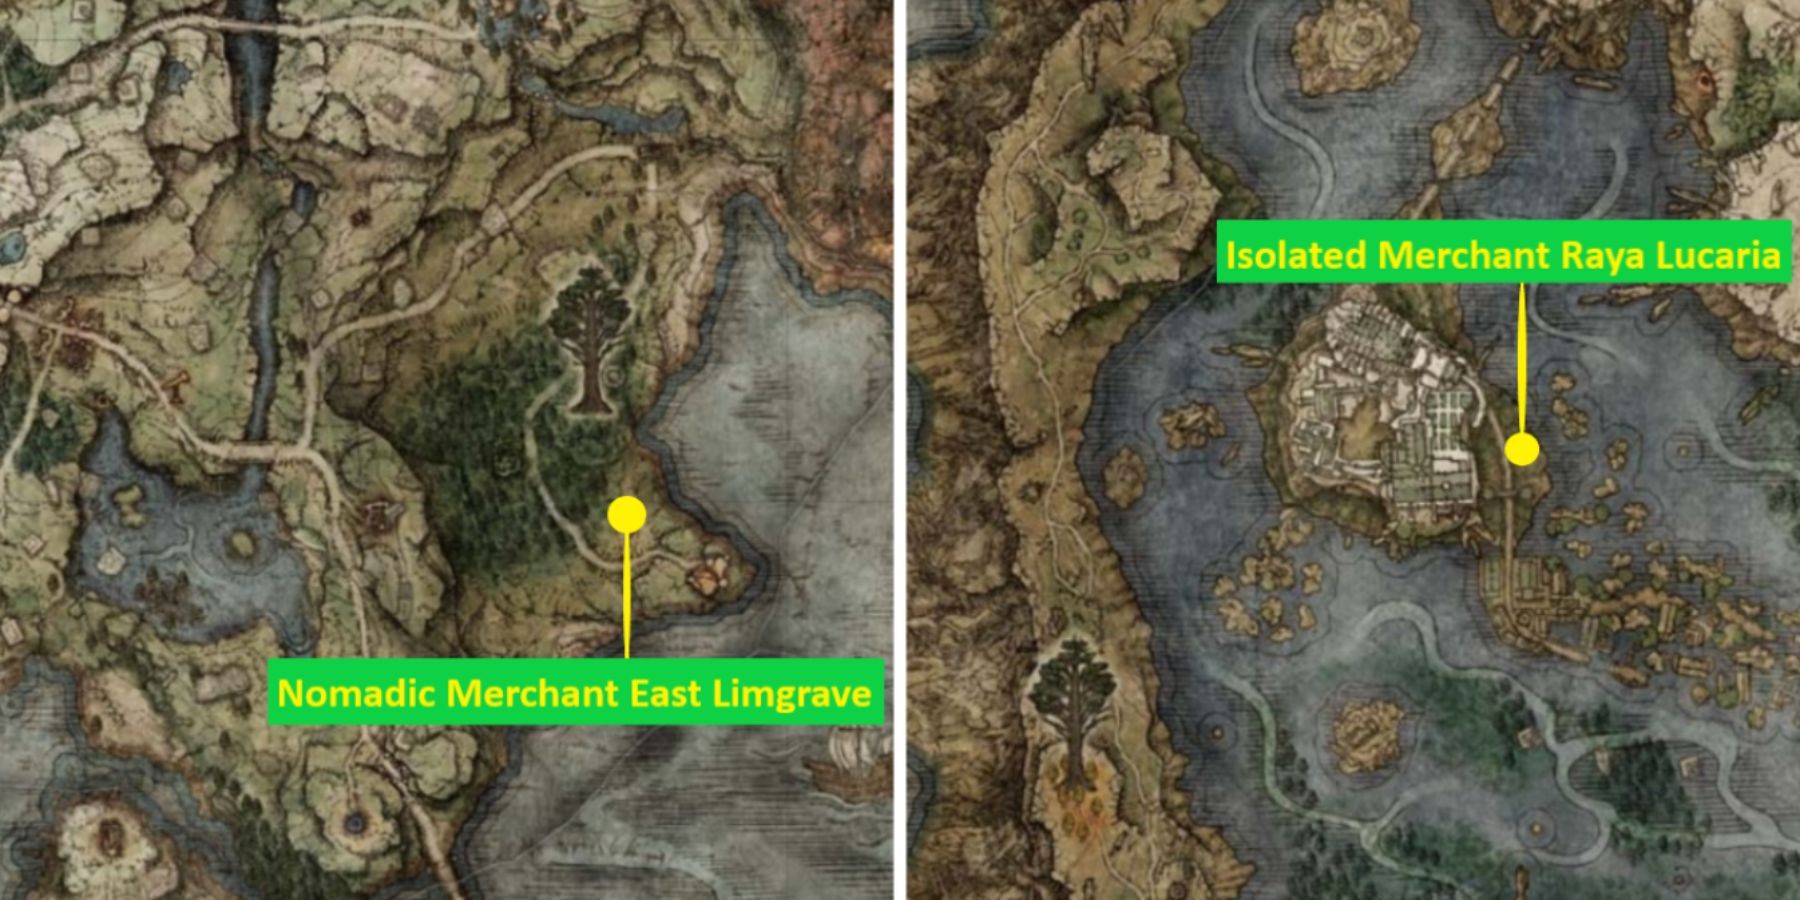 Nomadic Merchant East Limgrave and Isolated Merchant Raya Lucaria in Elden Ring